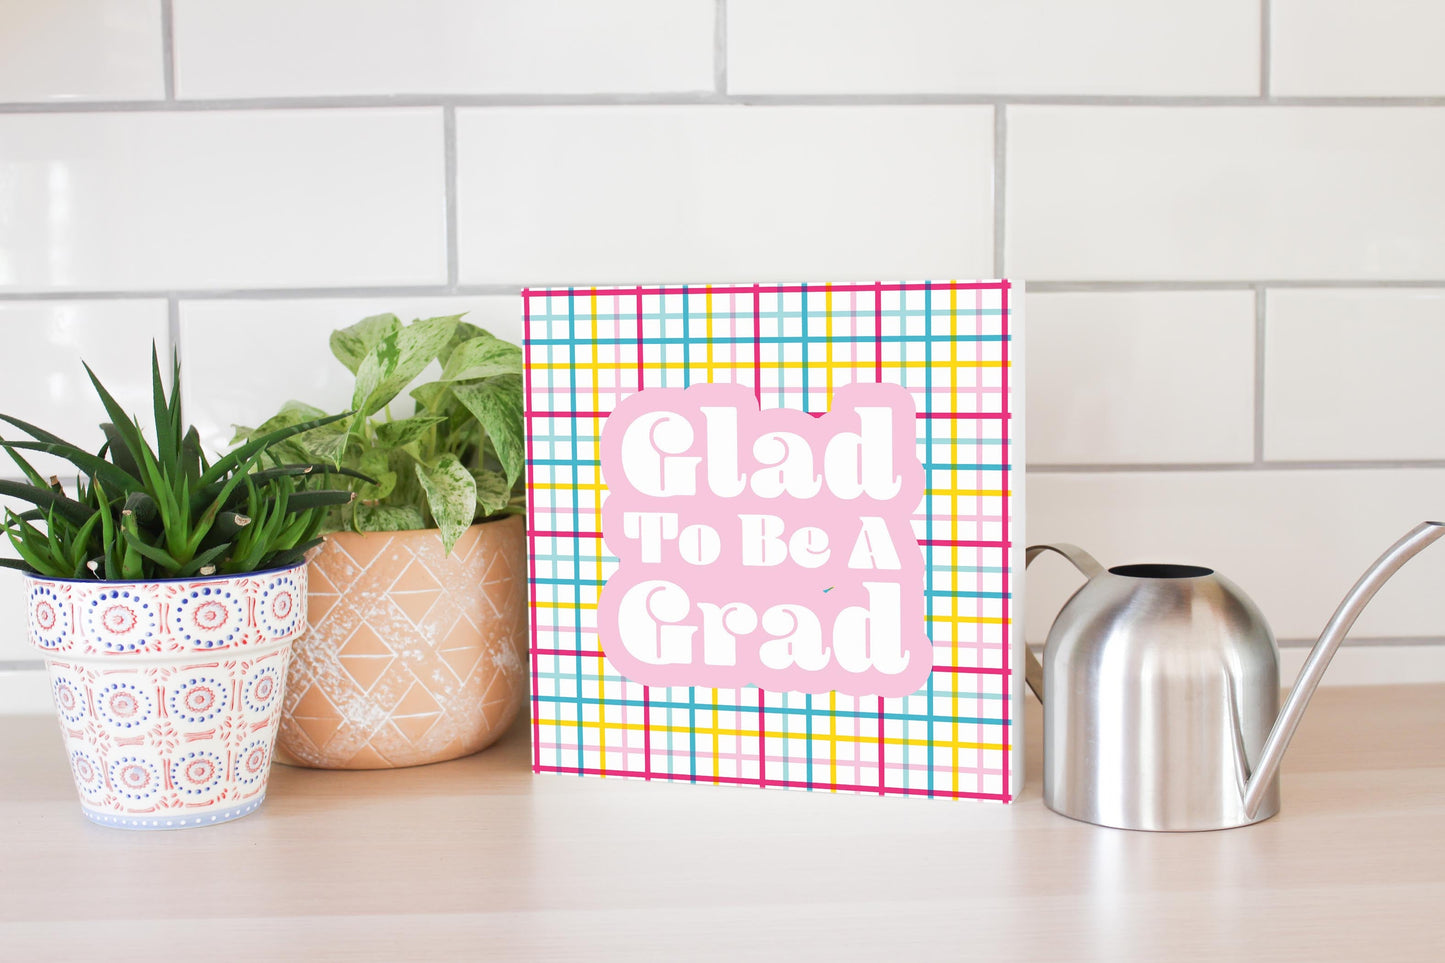 Glad To Be A Grad Colorful Grid | 10x10